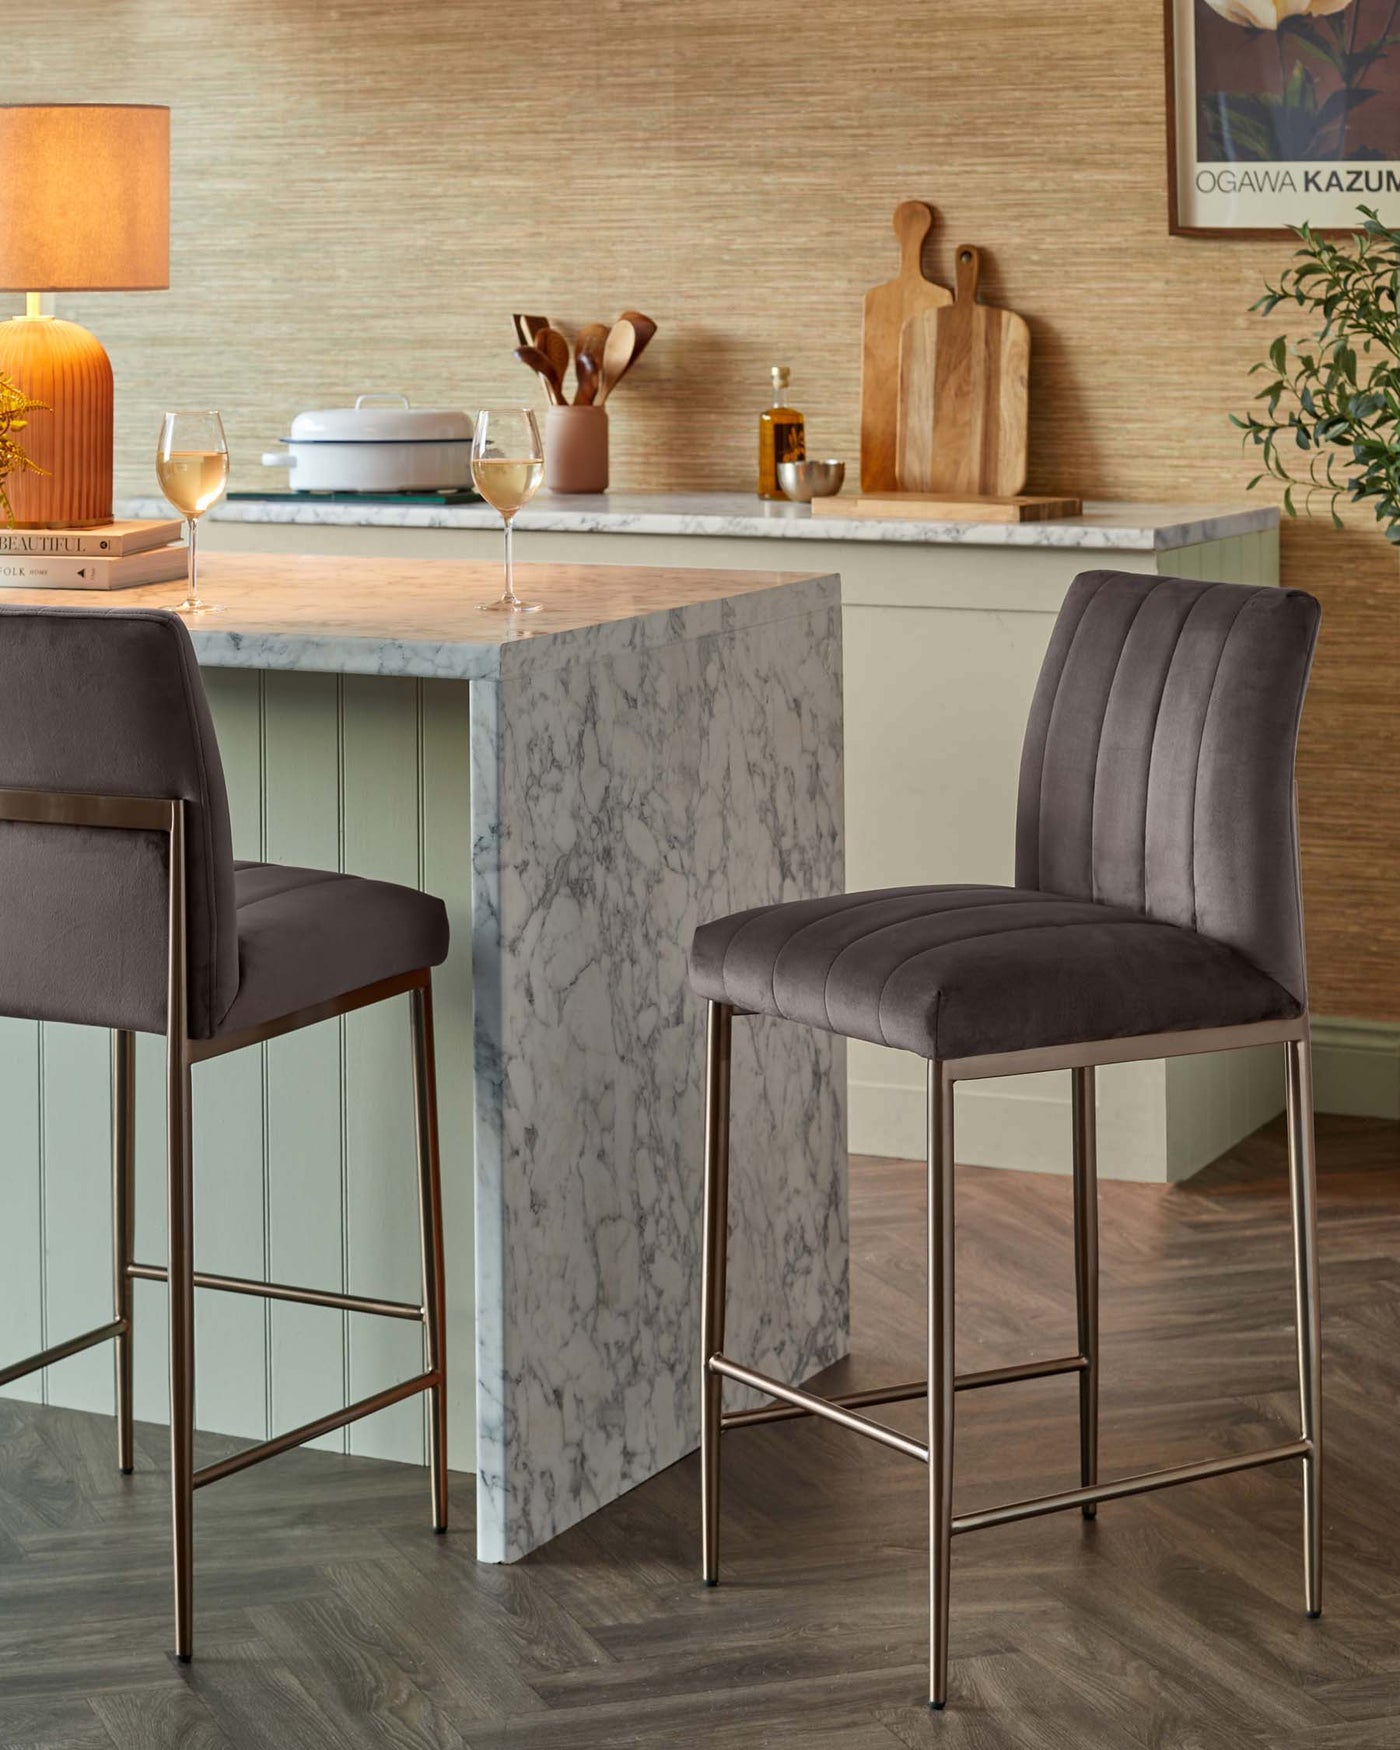 Elegant contemporary kitchen bar stools with dark grey upholstery and slender metal legs in a warm metallic finish, featuring a footrest for comfort.